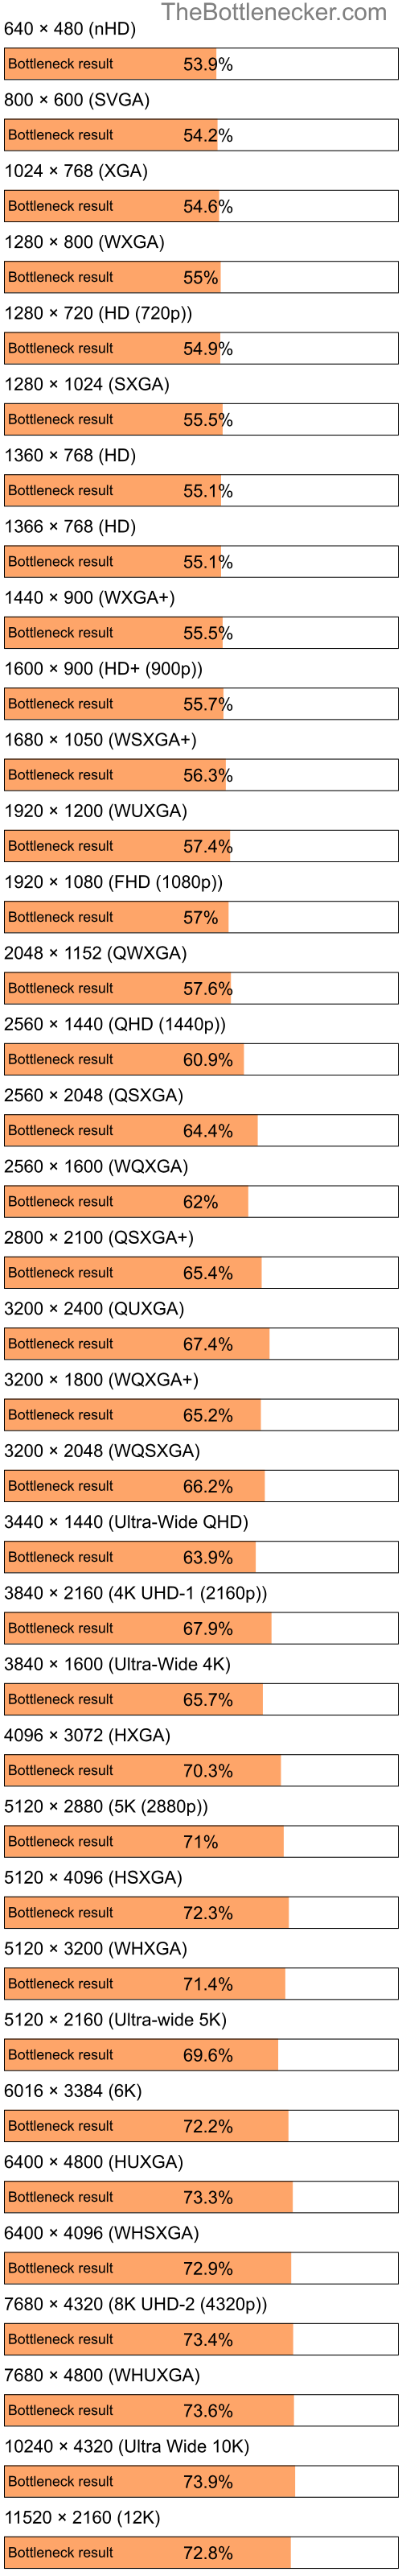 Bottleneck results by resolution for Intel Atom Z520 and AMD Mobility Radeon HD 3470 in Processor Intense Tasks